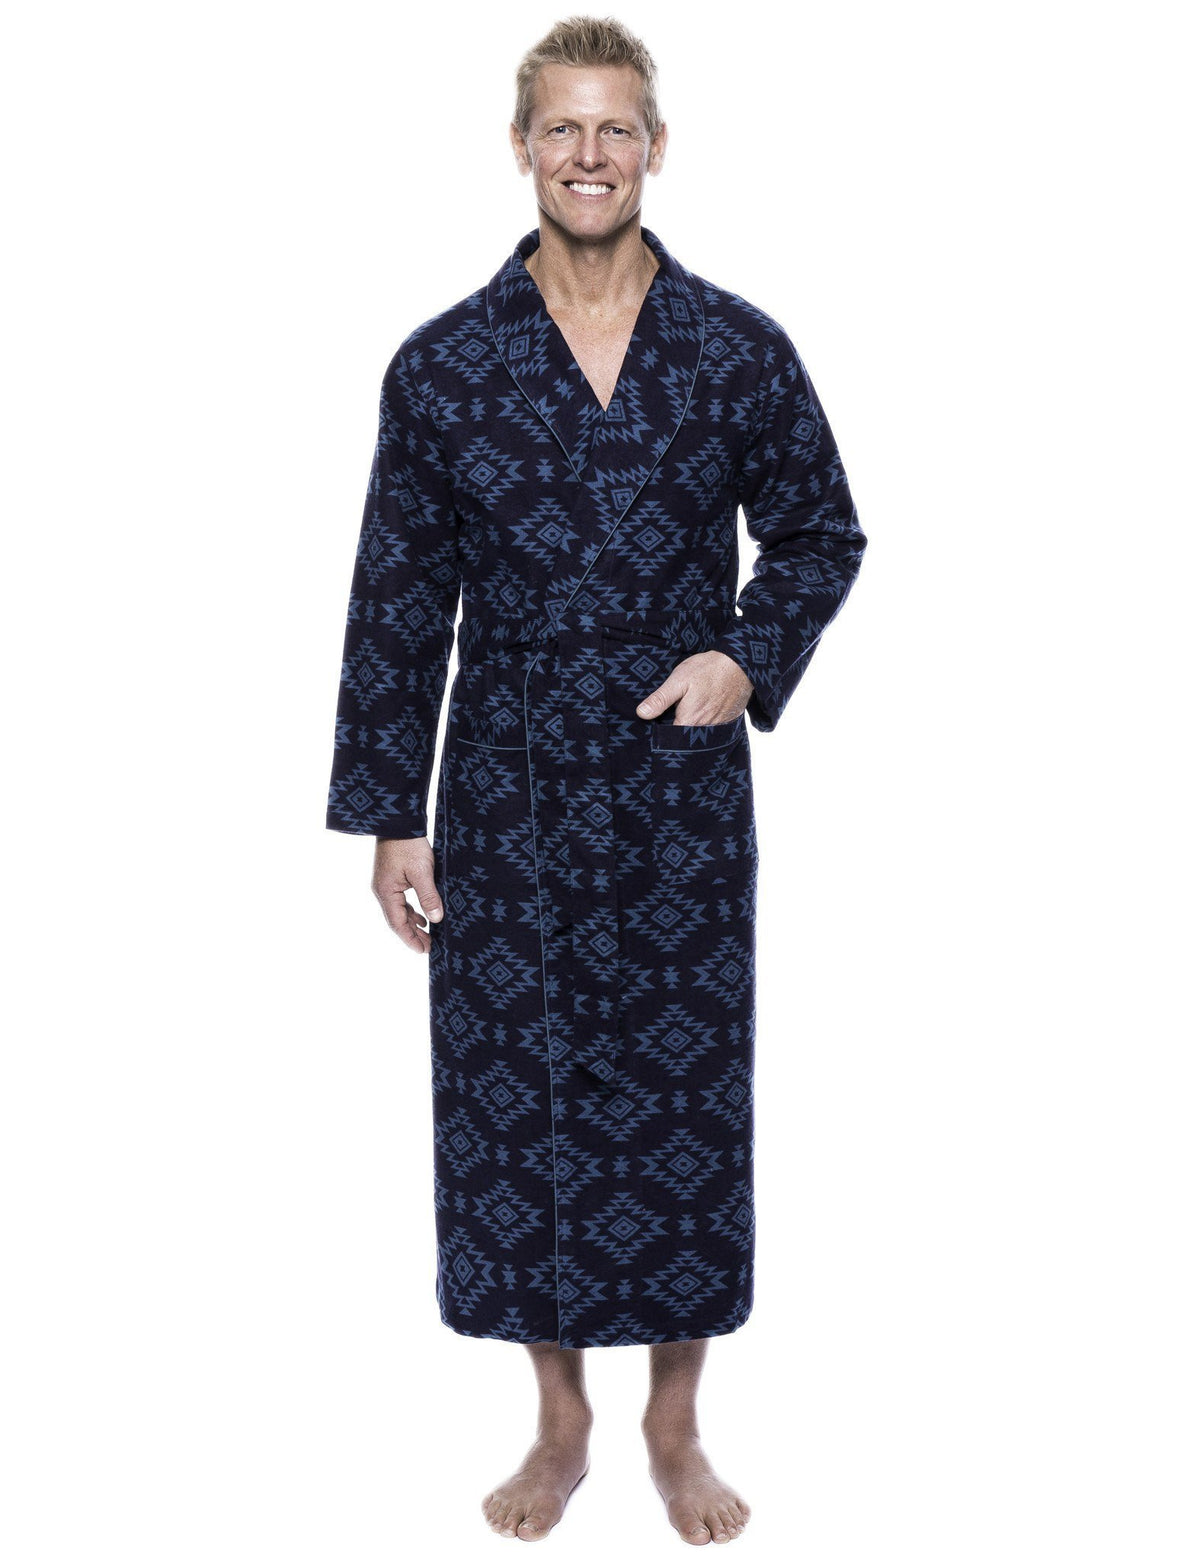 Men's 100% Cotton Thick Flannel Long Robe - Aztec Navy/Teal